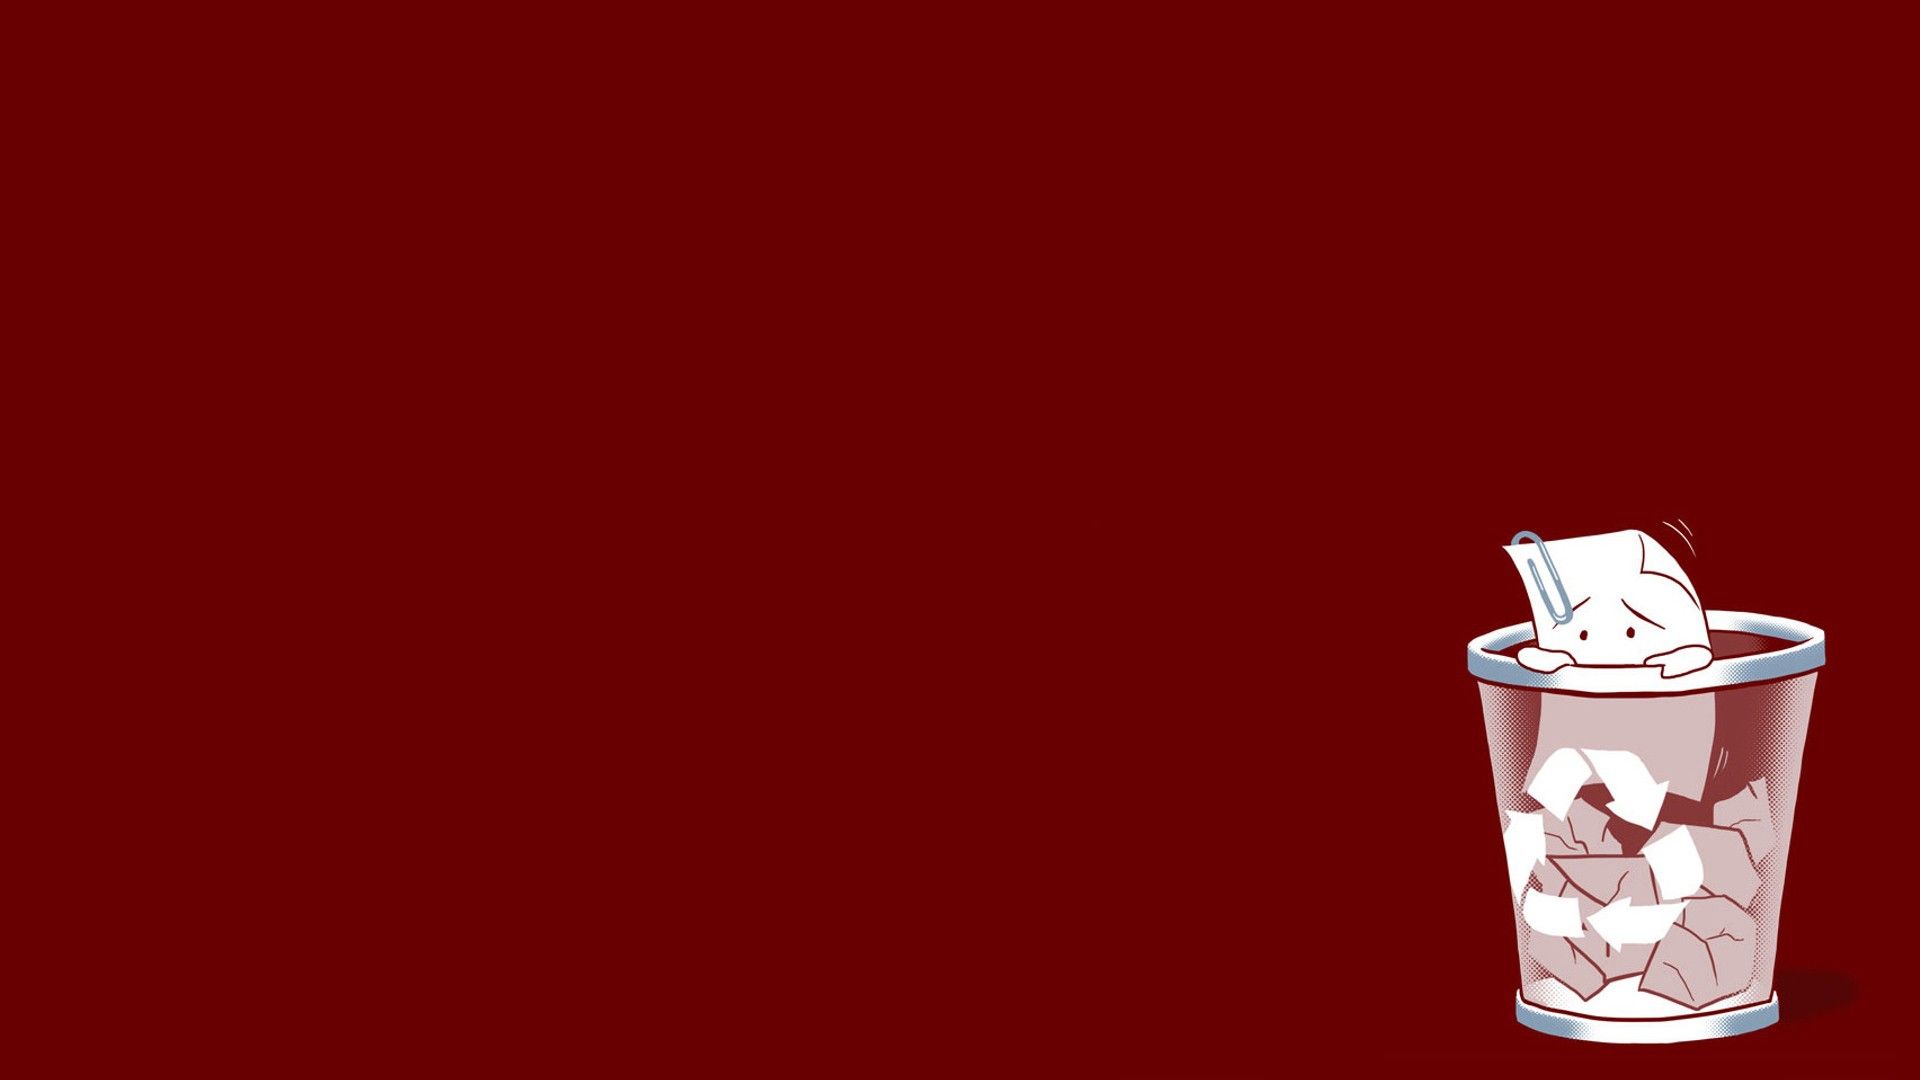 Red Pages Paper Simple Background Humor Wallpaper:1920x1080